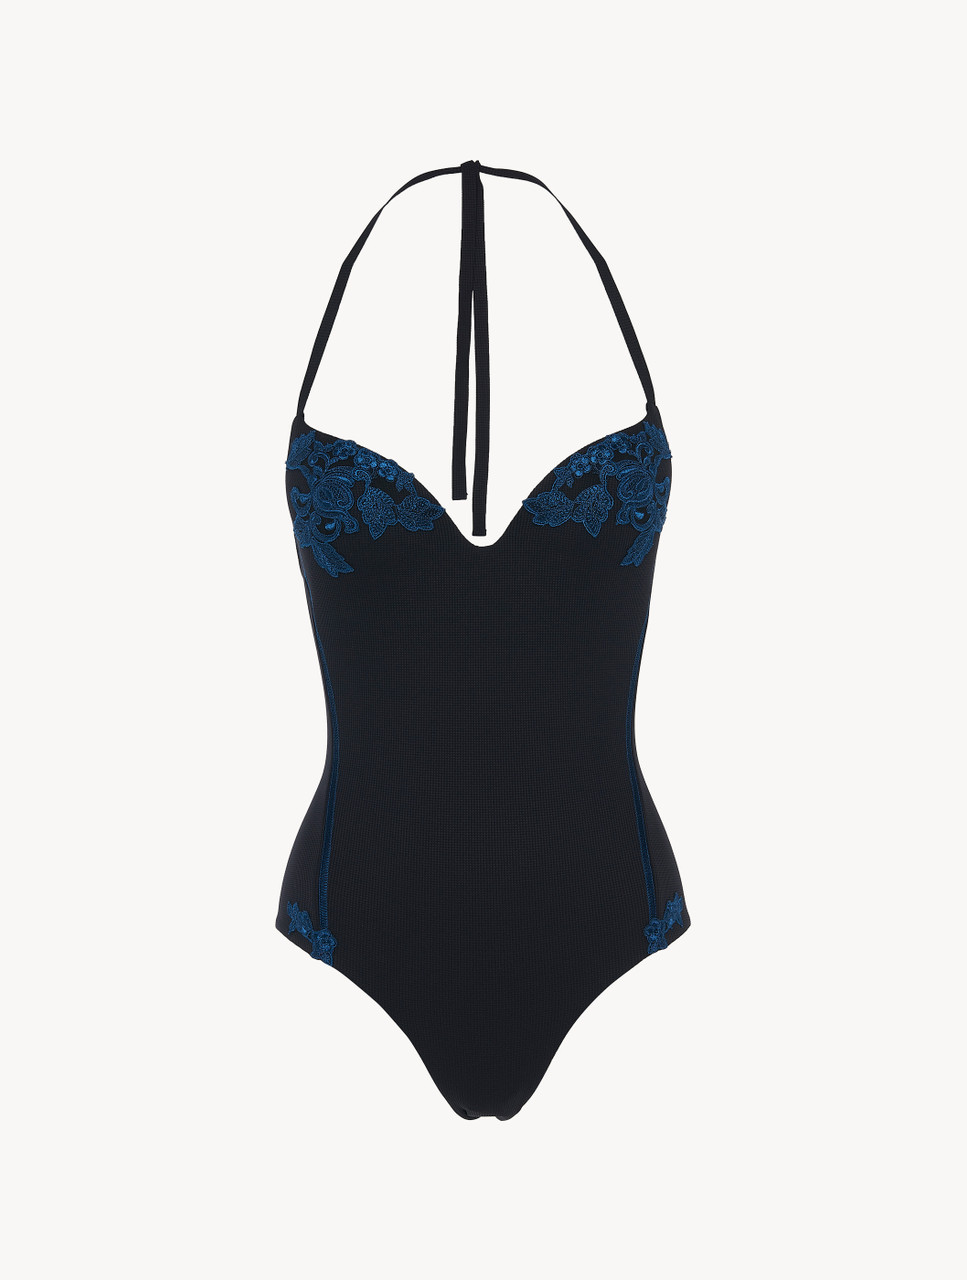 Swimsuit in black with dark blue embroidery and tulle - La Perla